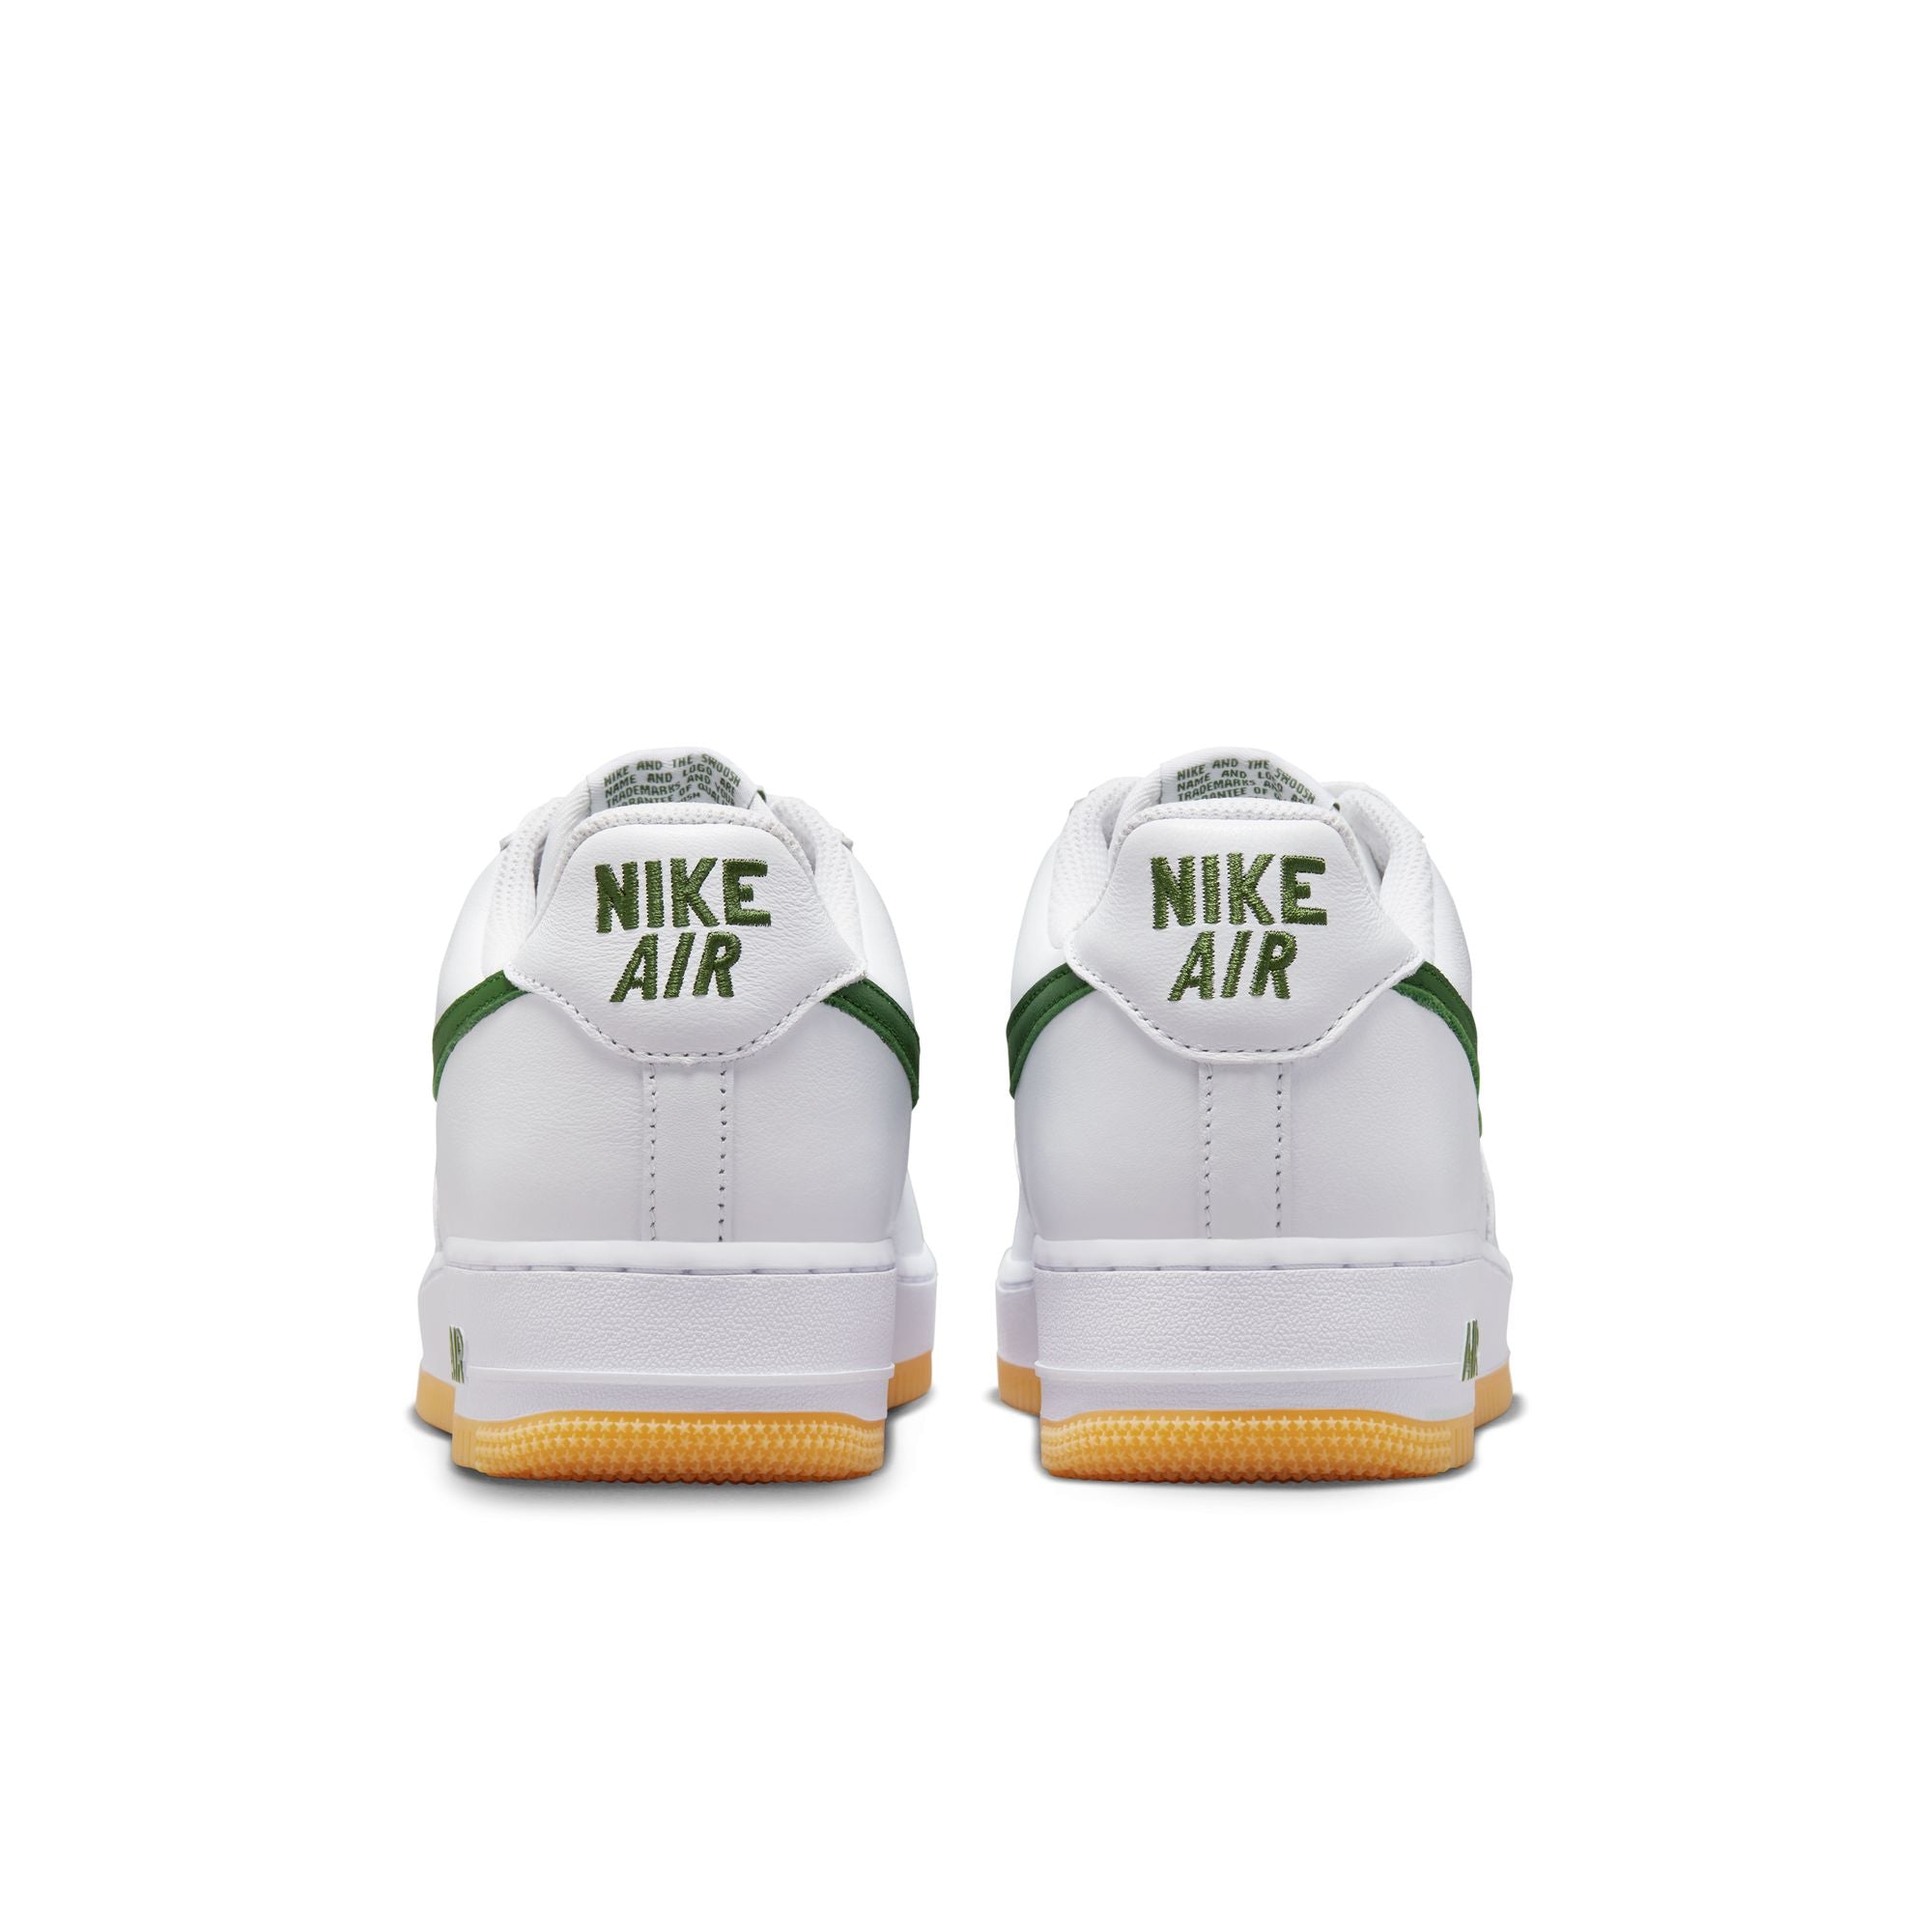 NIKE - Air Force 1 Low Retro Qs - (White/Forest Green-Gum Yellow) view 2